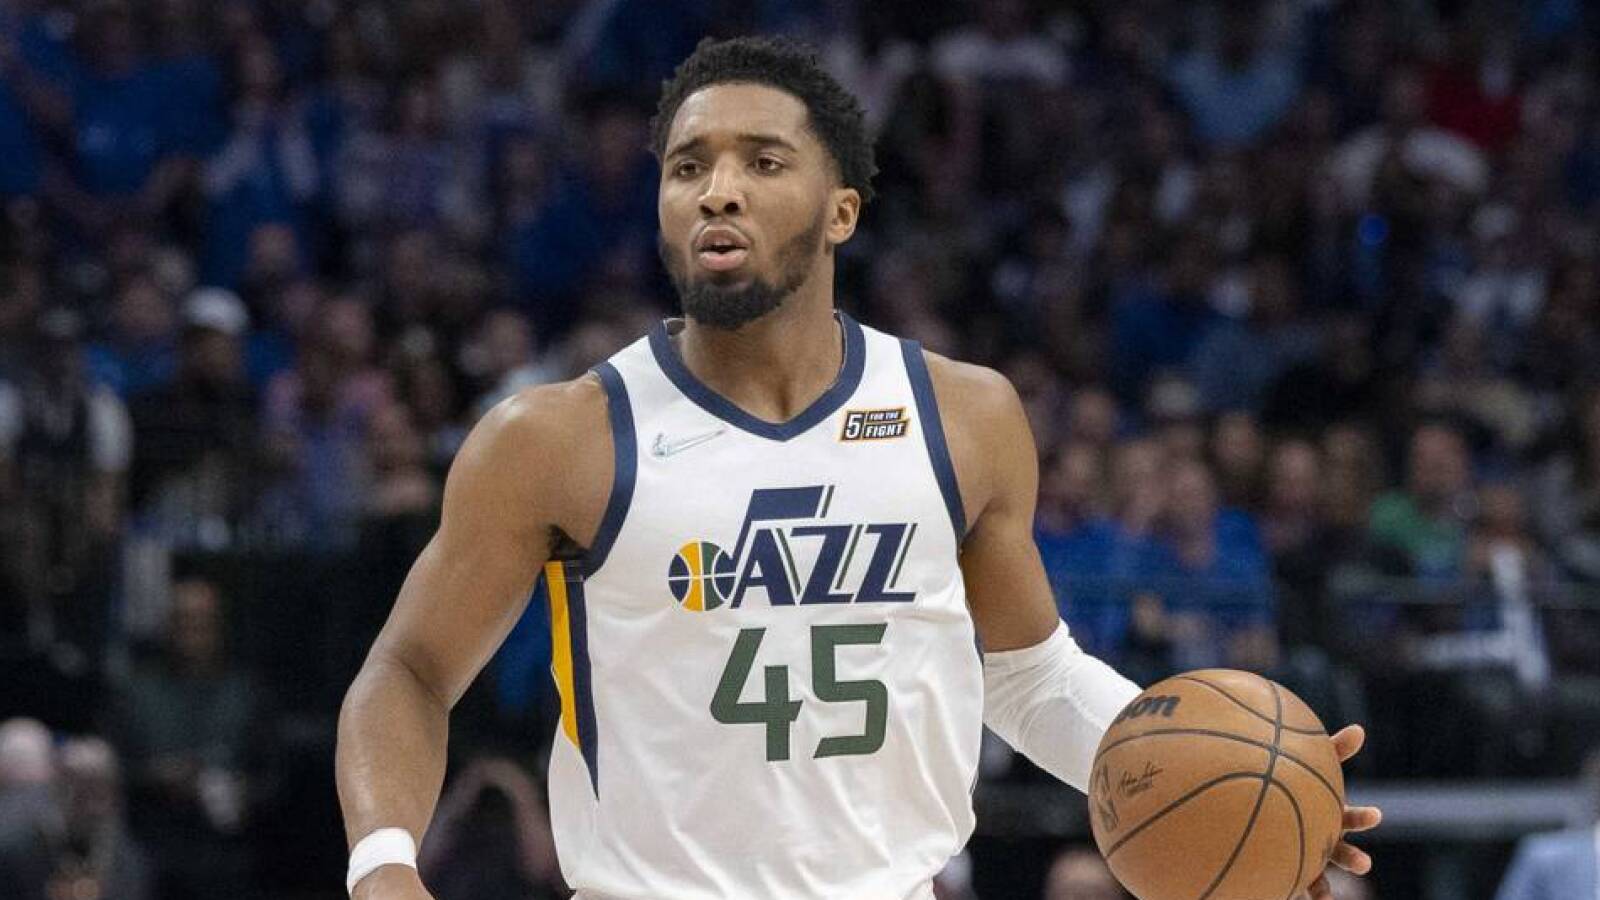 Report: Jazz committed to building around Donovan Mitchell